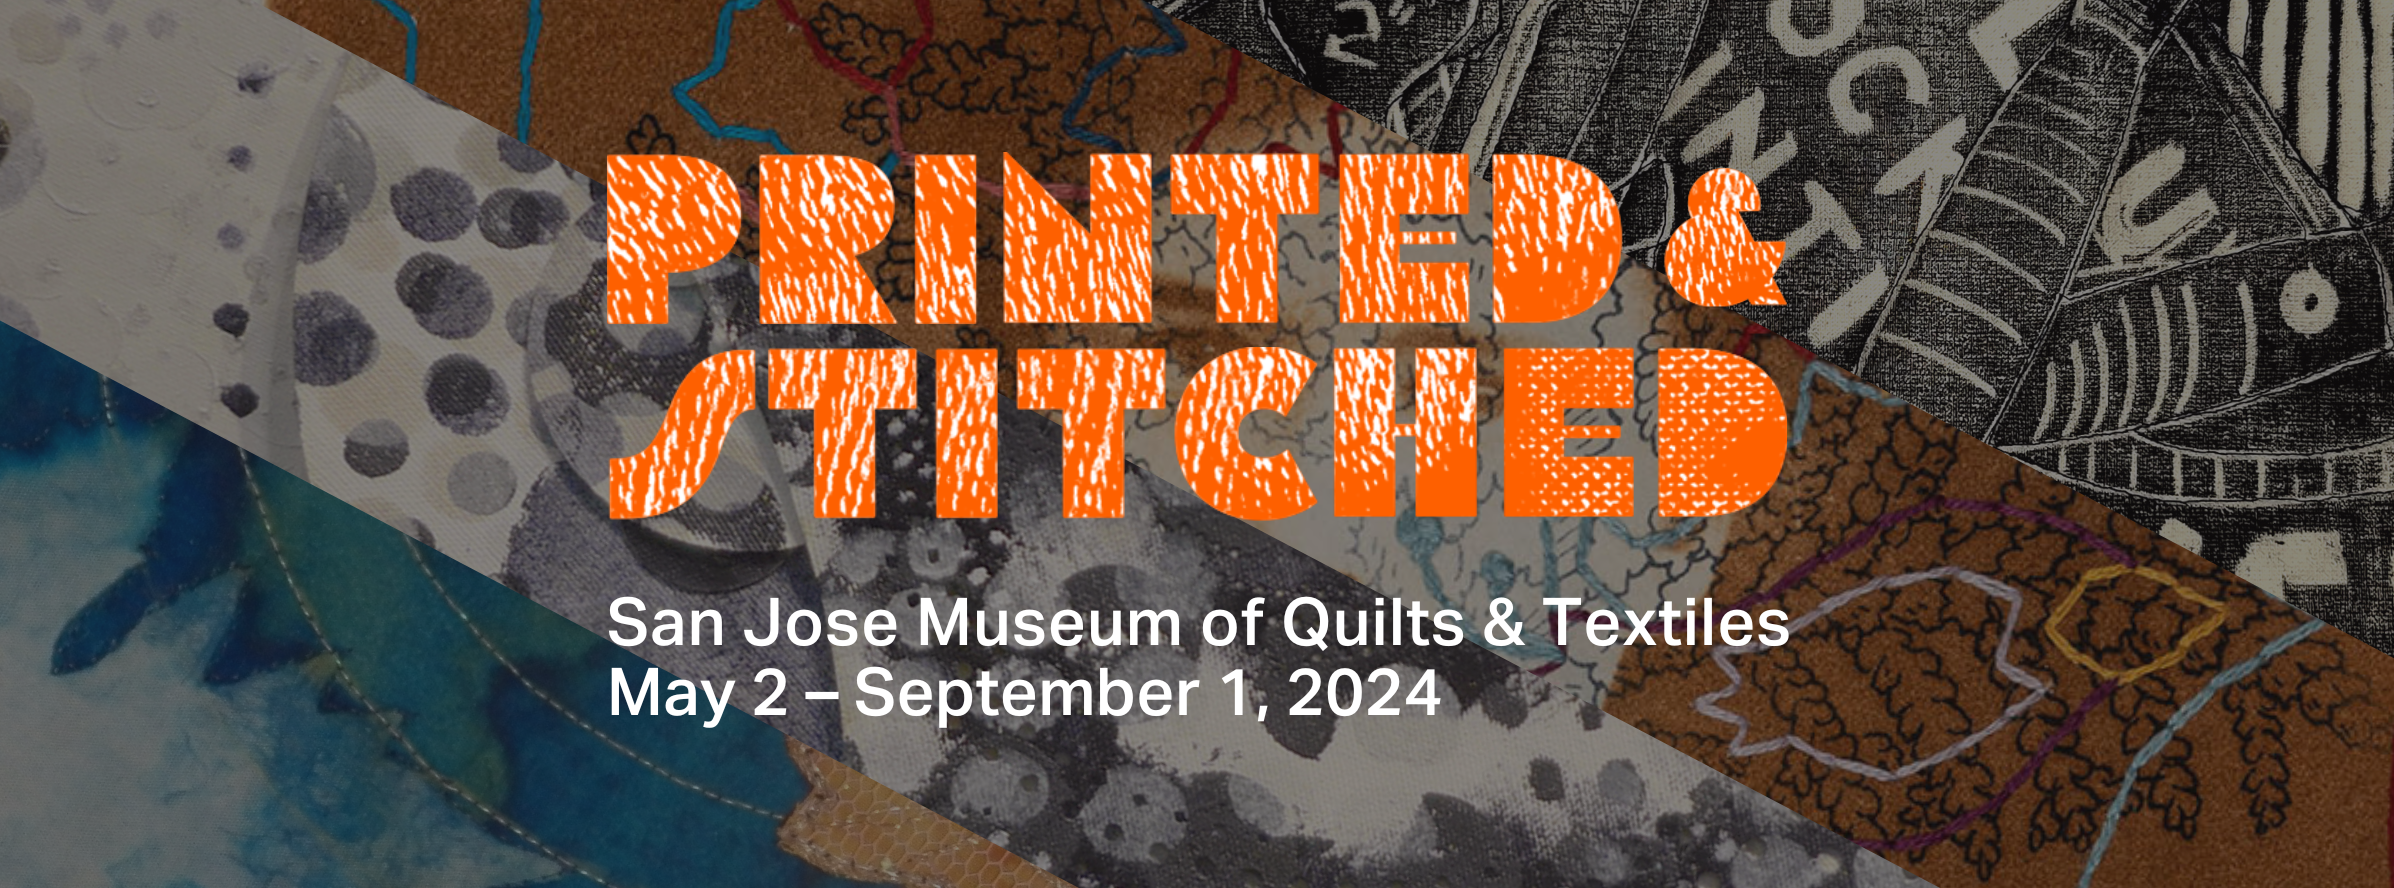 Printed and Stitched. San Jose Museum of Quilts & Textiles May 2 – September 1, 2024.